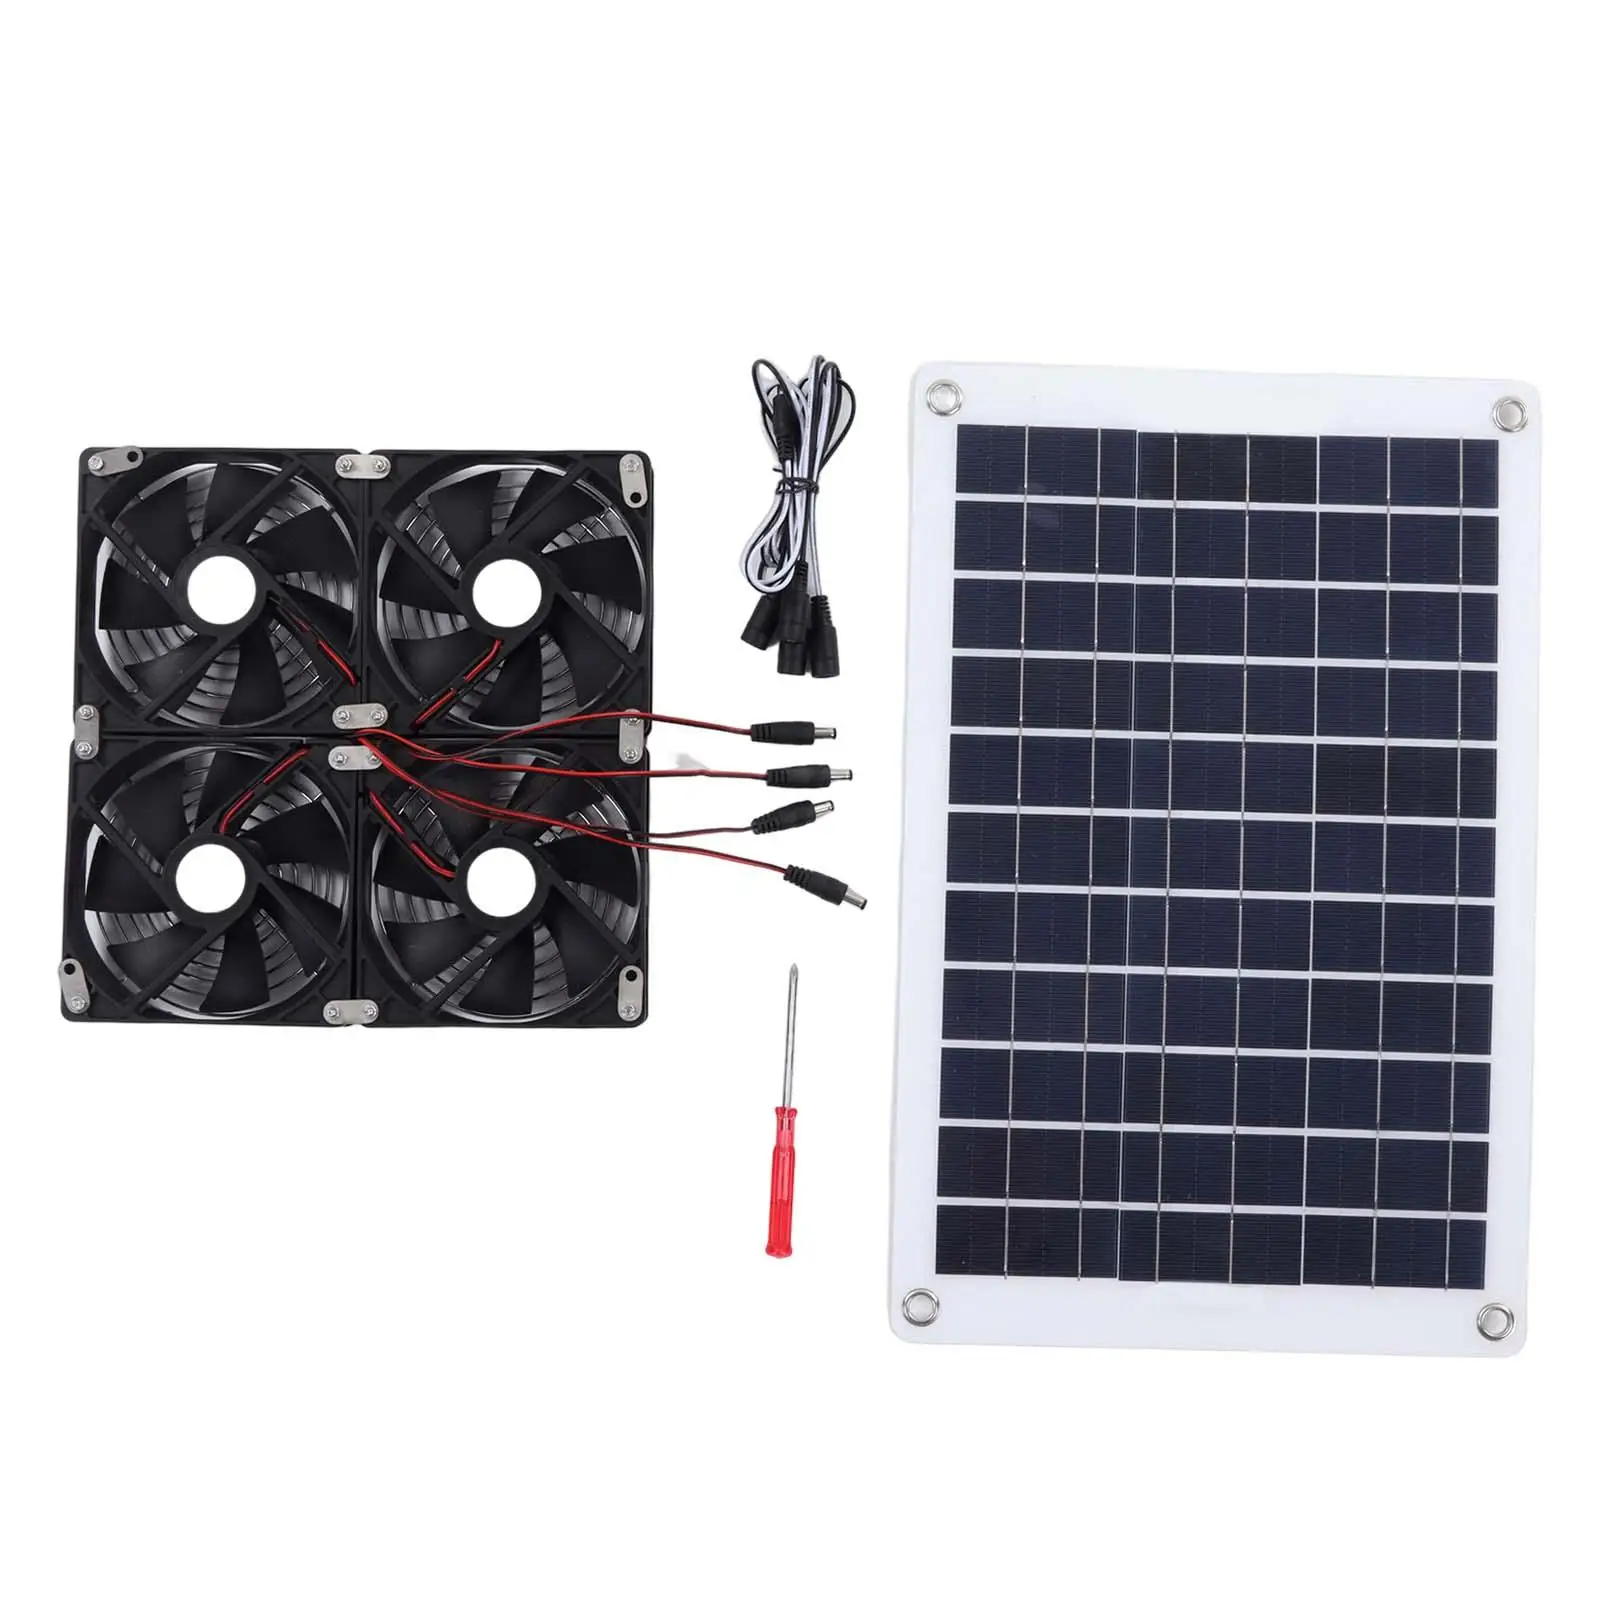 Solar Panel Exhaust Fan Solar Panel Fan Kit Mini Ventilator Portable for Greenhouse Dog House Sheds Outside Small Chicken Coops